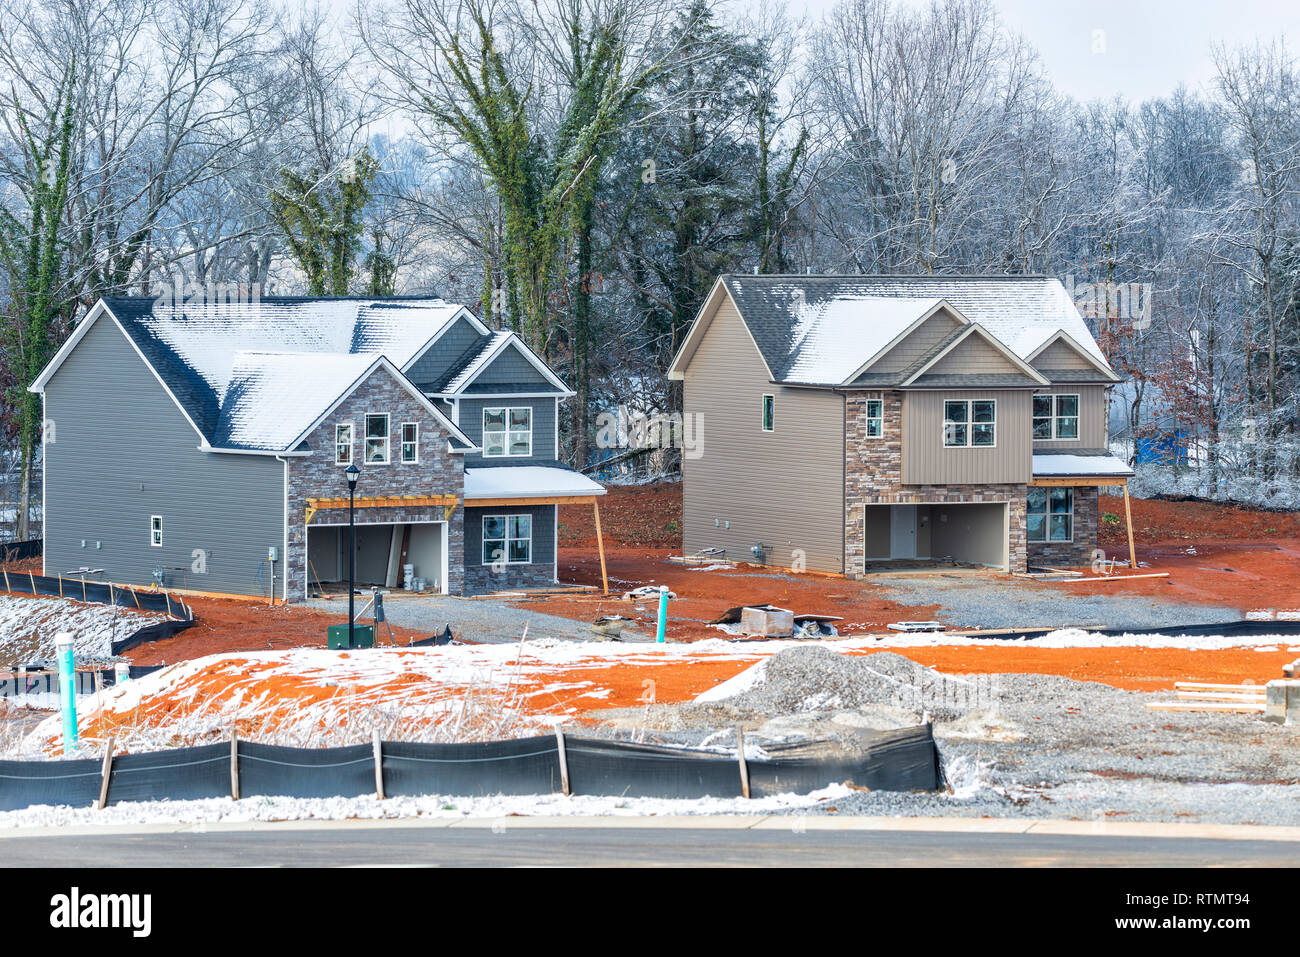 Horizontal shot of two new two-story homes under construction in the winter.  Snow is on the ground and roofs. Stock Photo